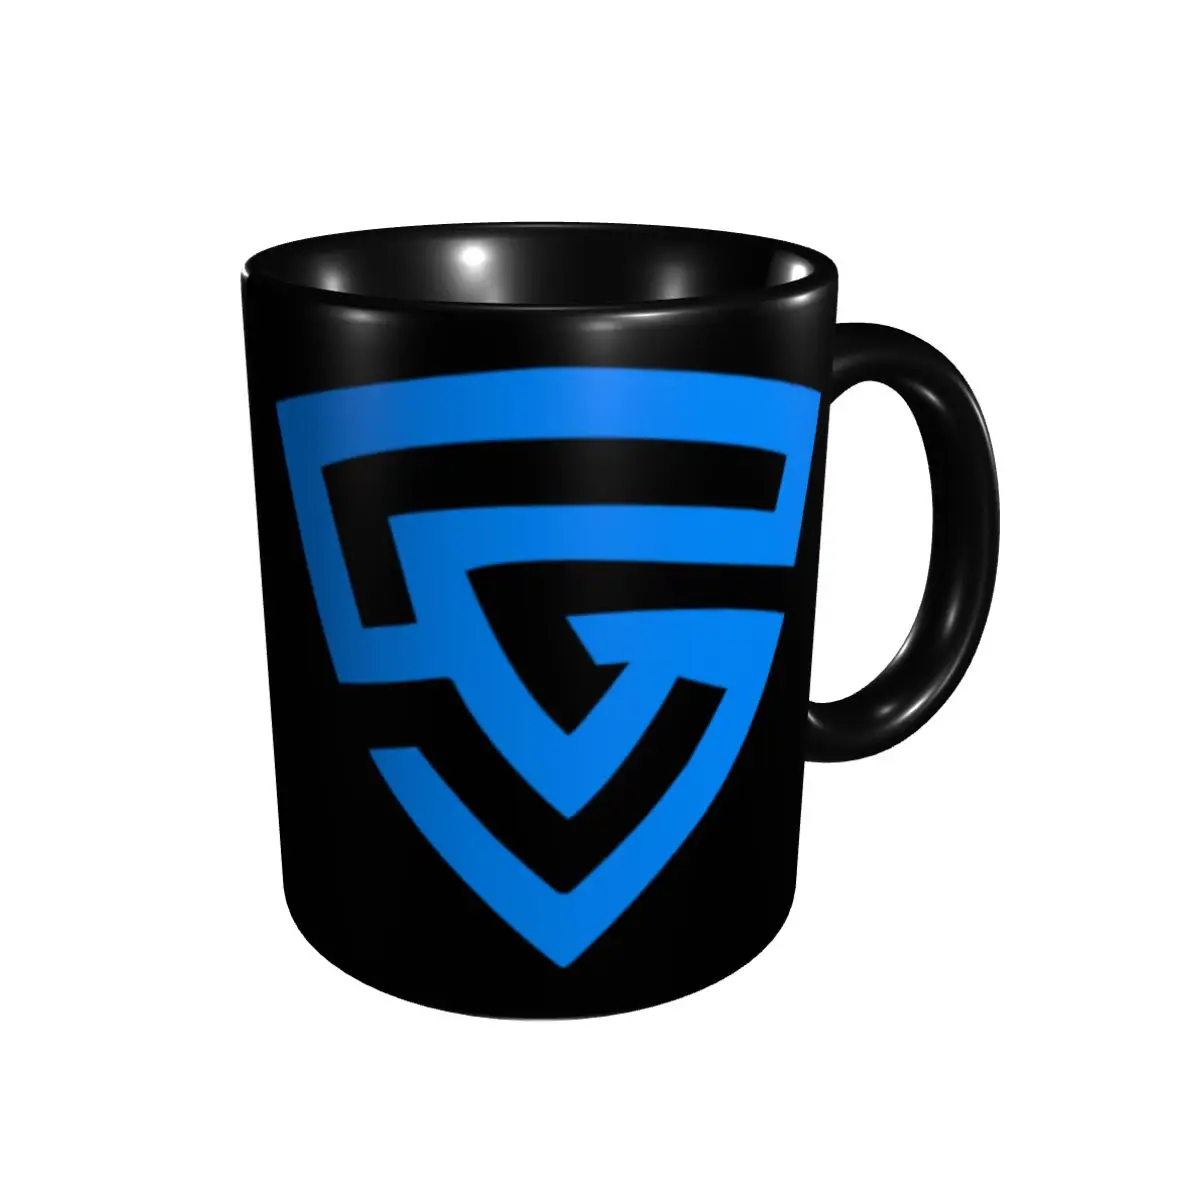 

Promo CRIPS E-Sports Mugs Graphic Cool Cups Mugs Print Funny Novelty R346 multi-function cups